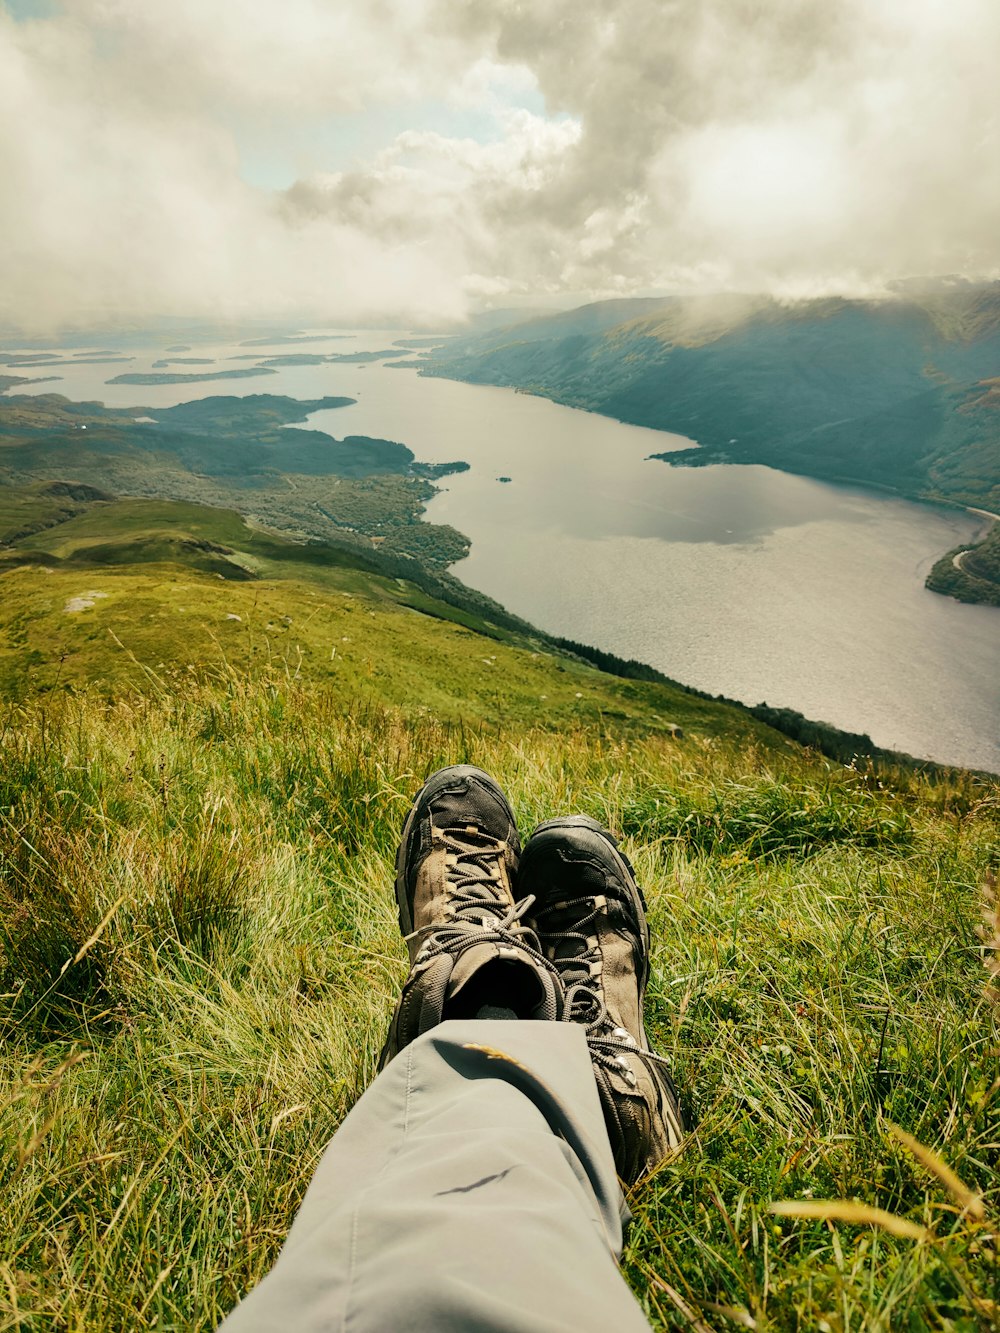 a person's feet on a grassy hill overlooking a body of water